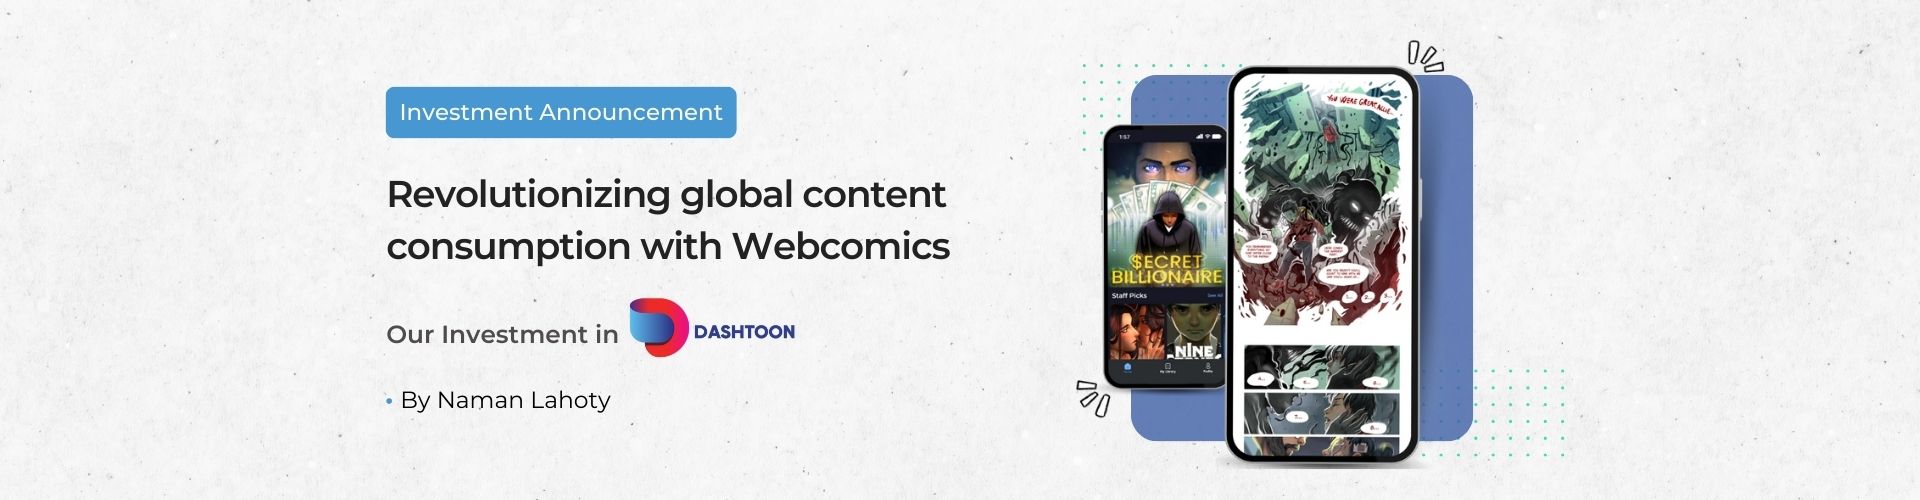 Revolutionizing global content consumption with webcomics: Our Investment in Dashtoon